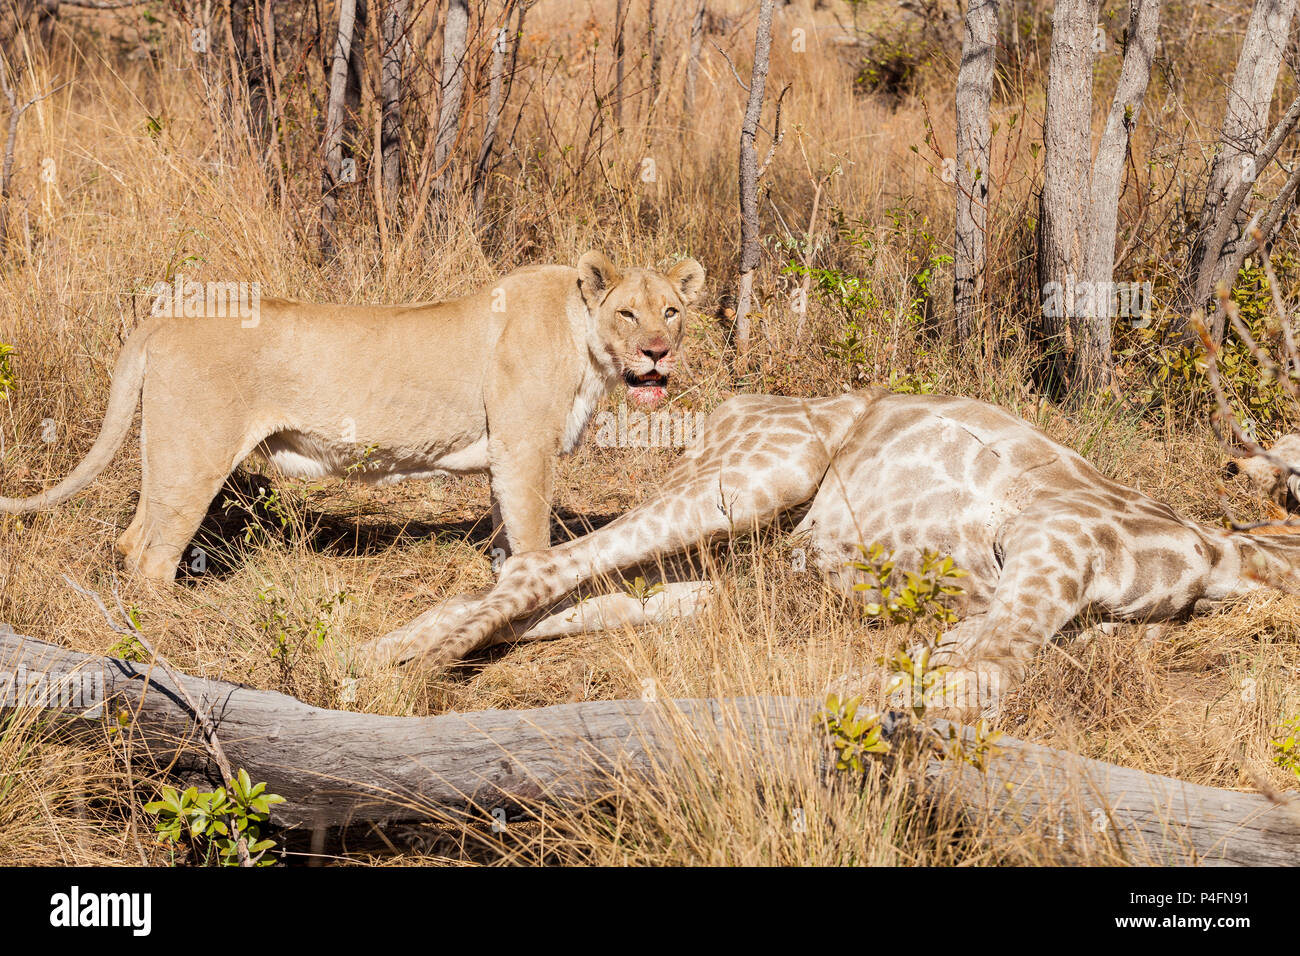 African Lion eating a Giraffe on safari in a South African Game Reserve Stock Photo